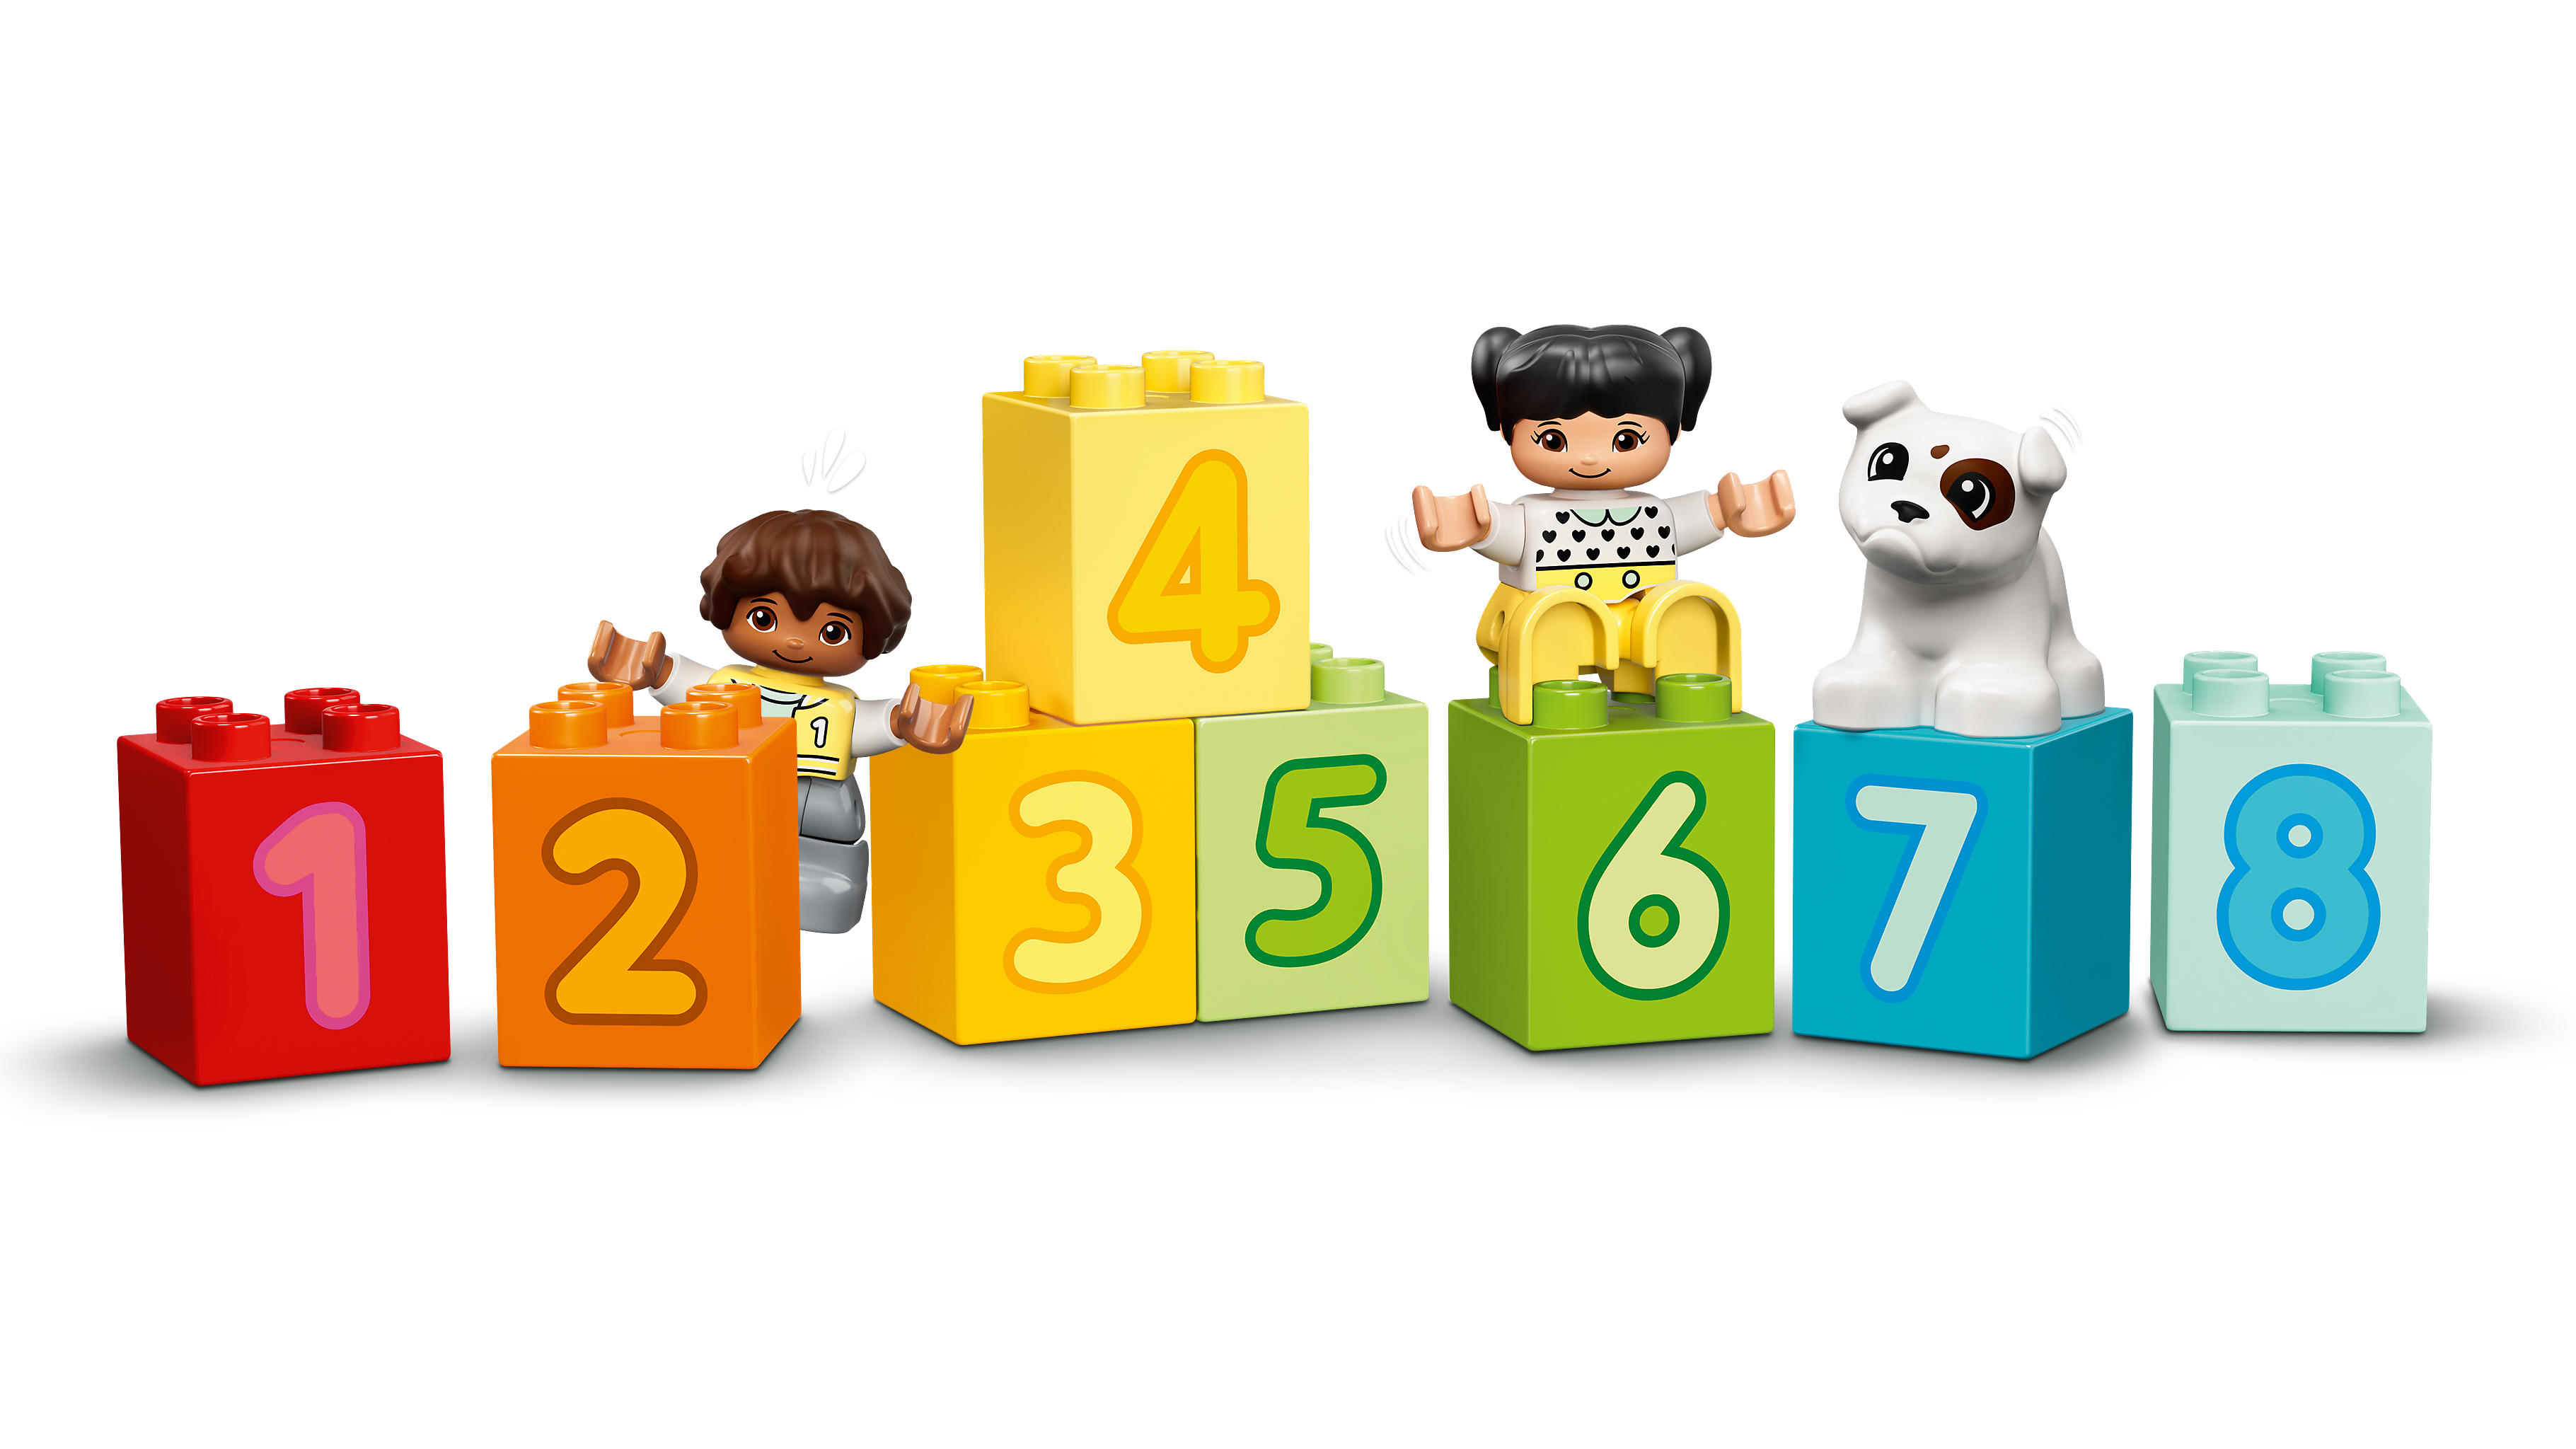 Number Train - Learn To Count 10954, DUPLO®